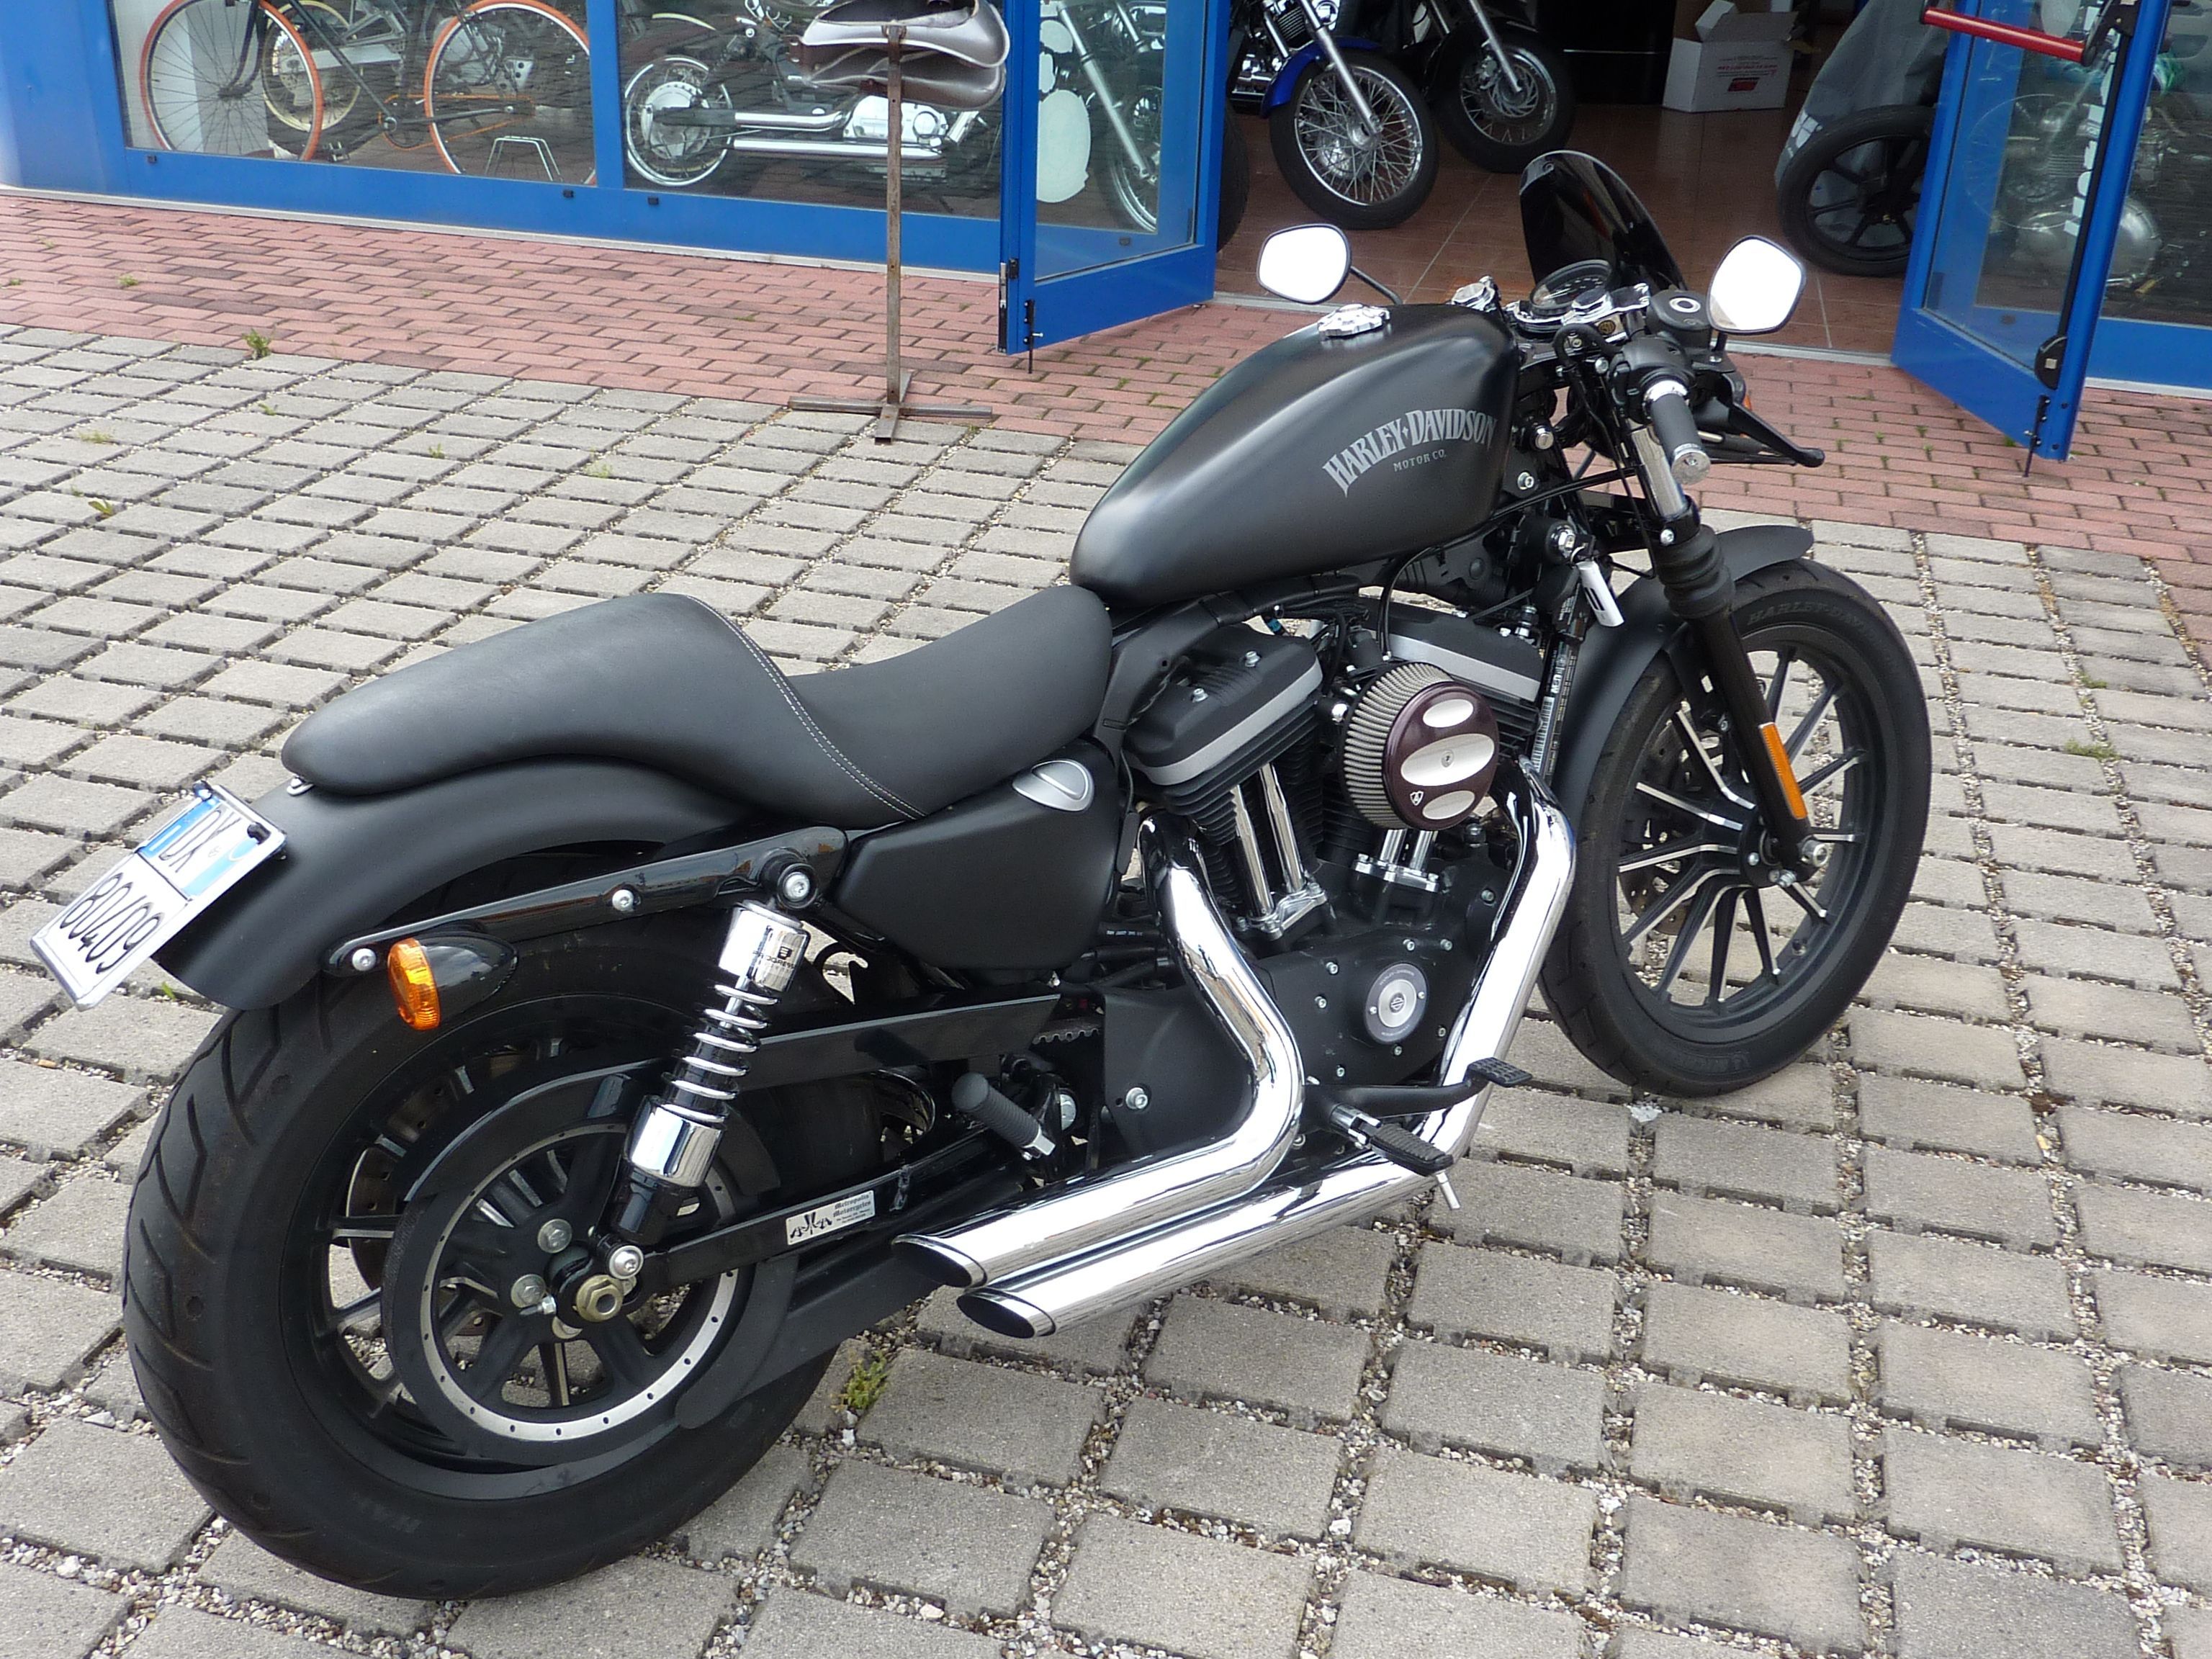 Harley-Davidson Sportster 883 Iron, Cafe Style, modified by Chop's